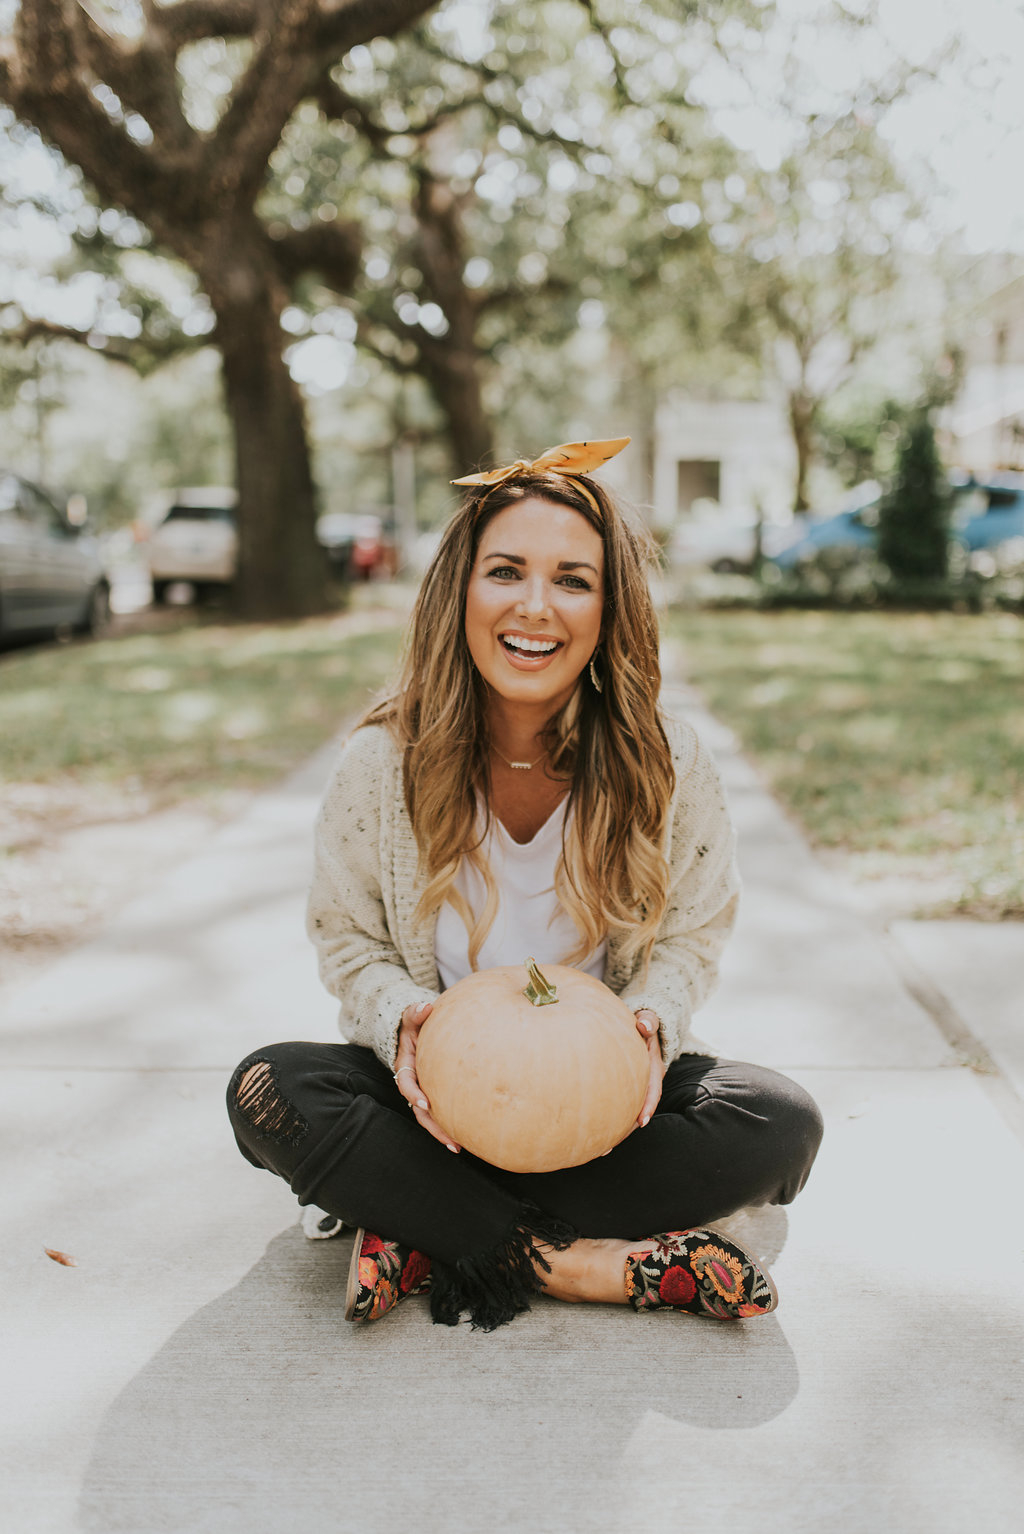 TODAY MARKS THE OFFICIAL FIRST DAY OF FALL. WHAT ARE SOME OF YOUR FAVORITE THINGS ABOUT THIS SEASON? READ MORE TO SEE HOW HOW I AM GETTING INTO THE SPIRIT OF THE SEASON.